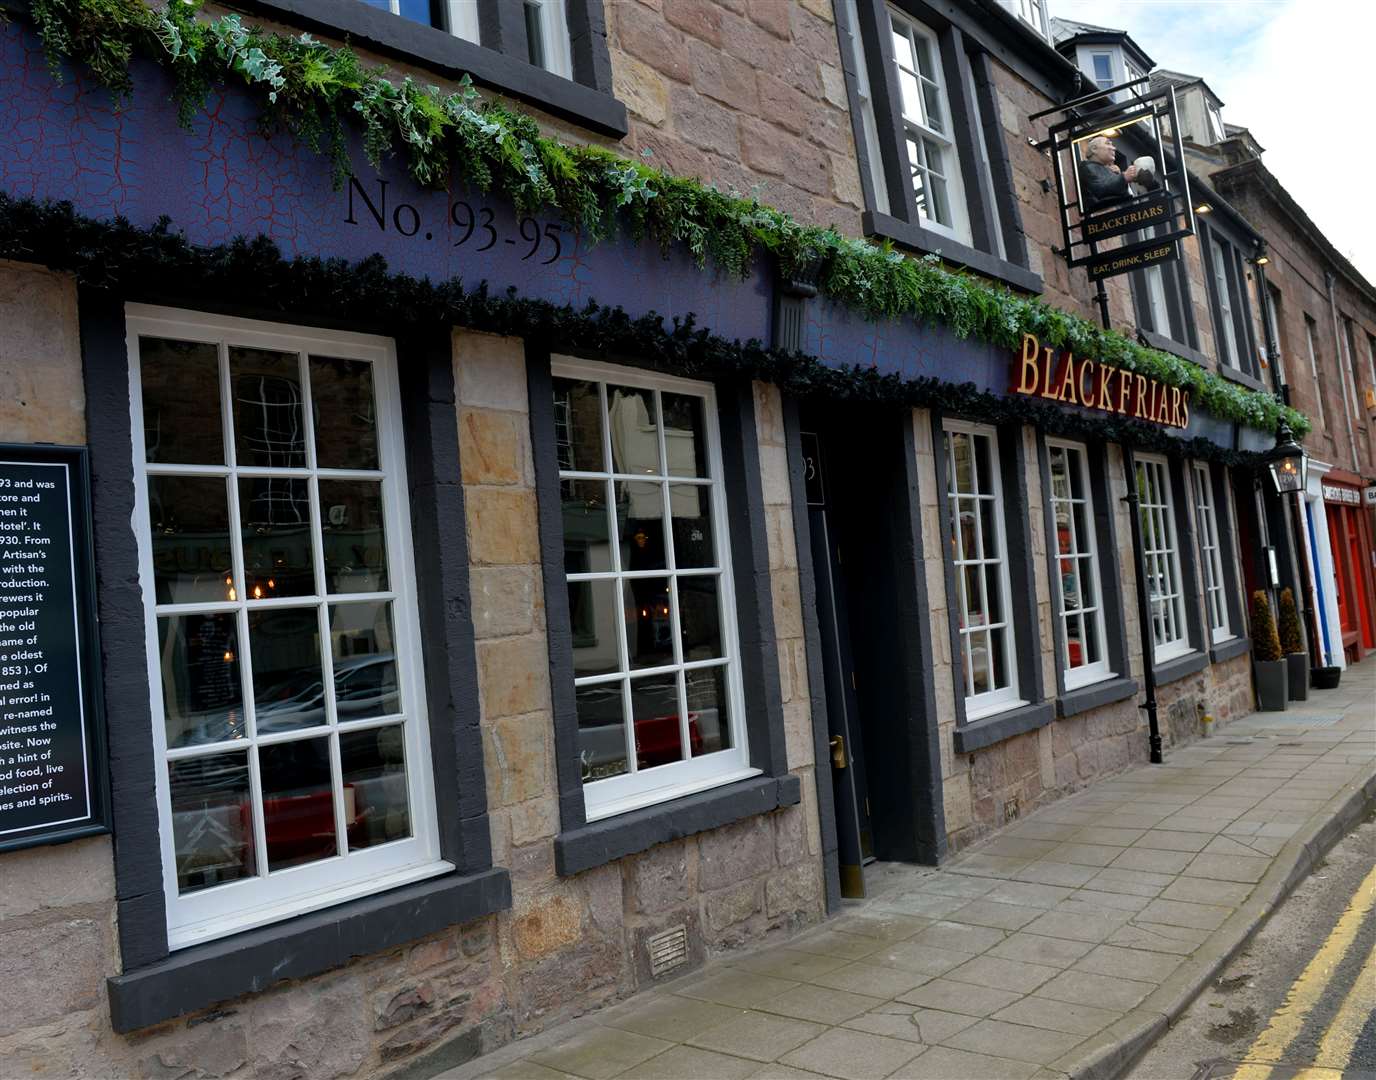 The Blackfriars pub benefited from £1.36m investment.